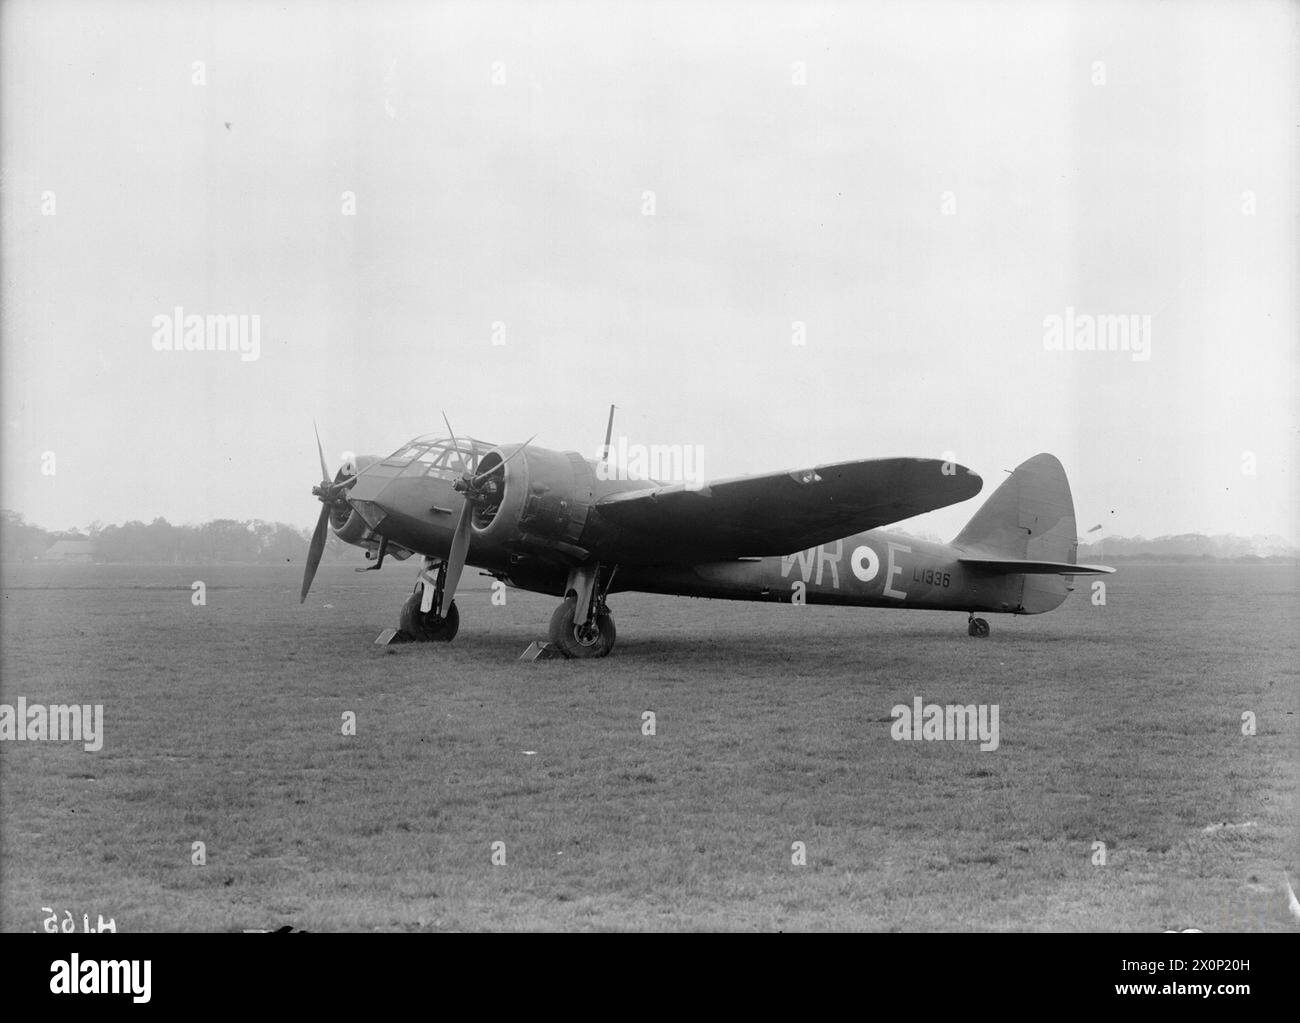 AIRCRAFT OF THE ROYAL AIR FORCE 1939-1945: BRISTOL TYPE 142M BLENHEIM I. - Blenheim Mark IF, L1336 WR-E, of No. 248 Squadron RAF based at Hendon, on the ground at Northolt, Middlesex , Royal Air Force, Wing, 246 Stock Photo